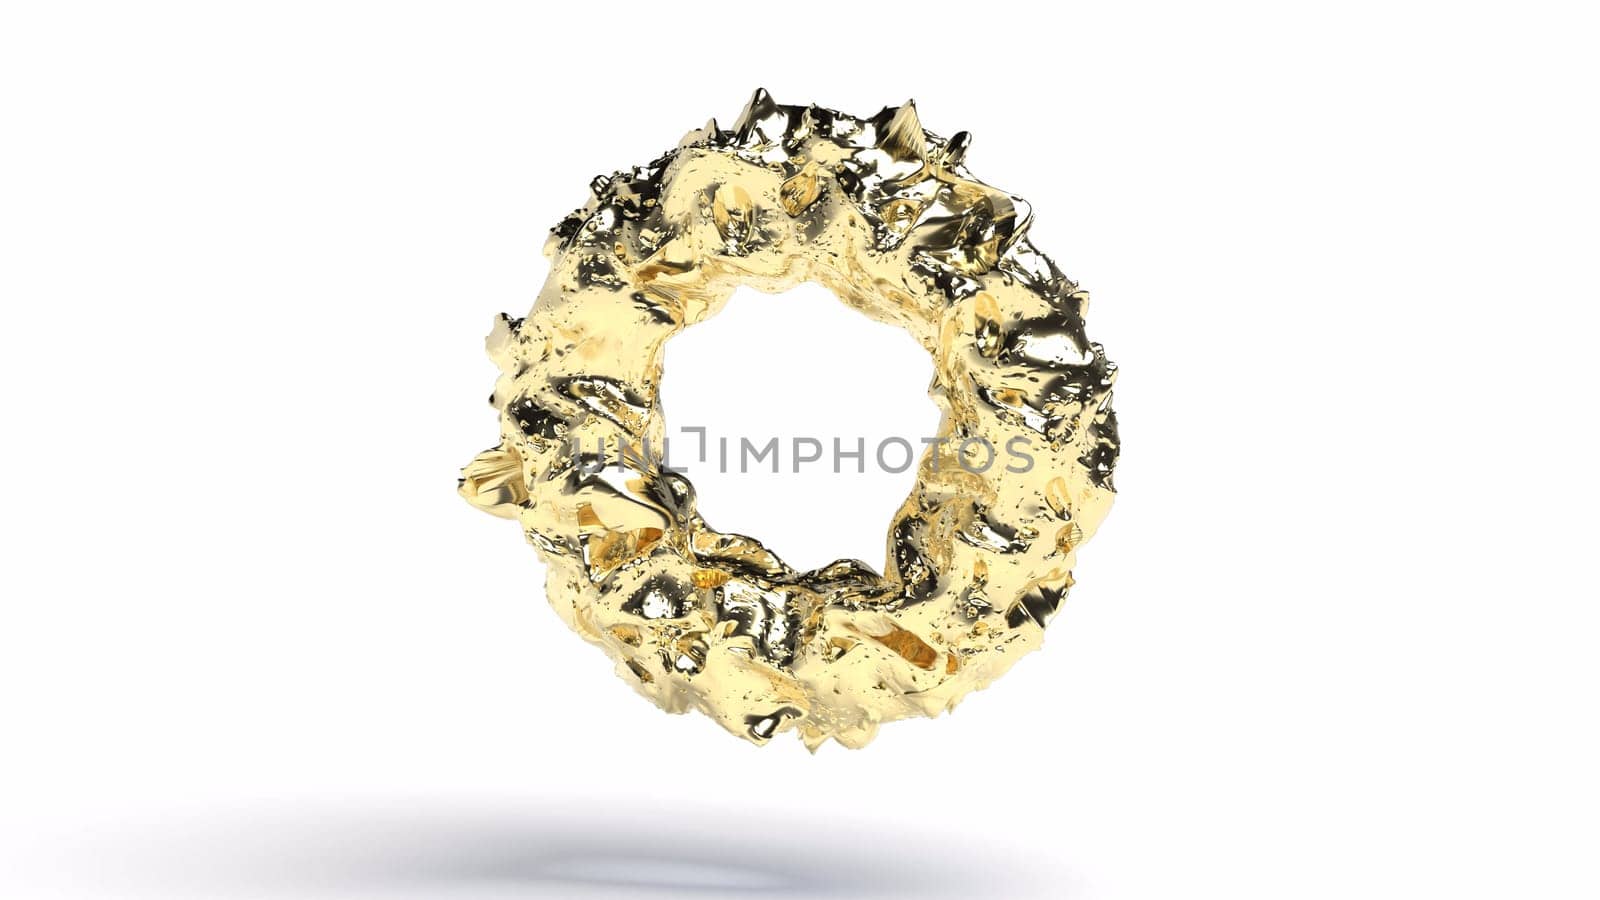 Gold noise circle 3d render by Zozulinskyi